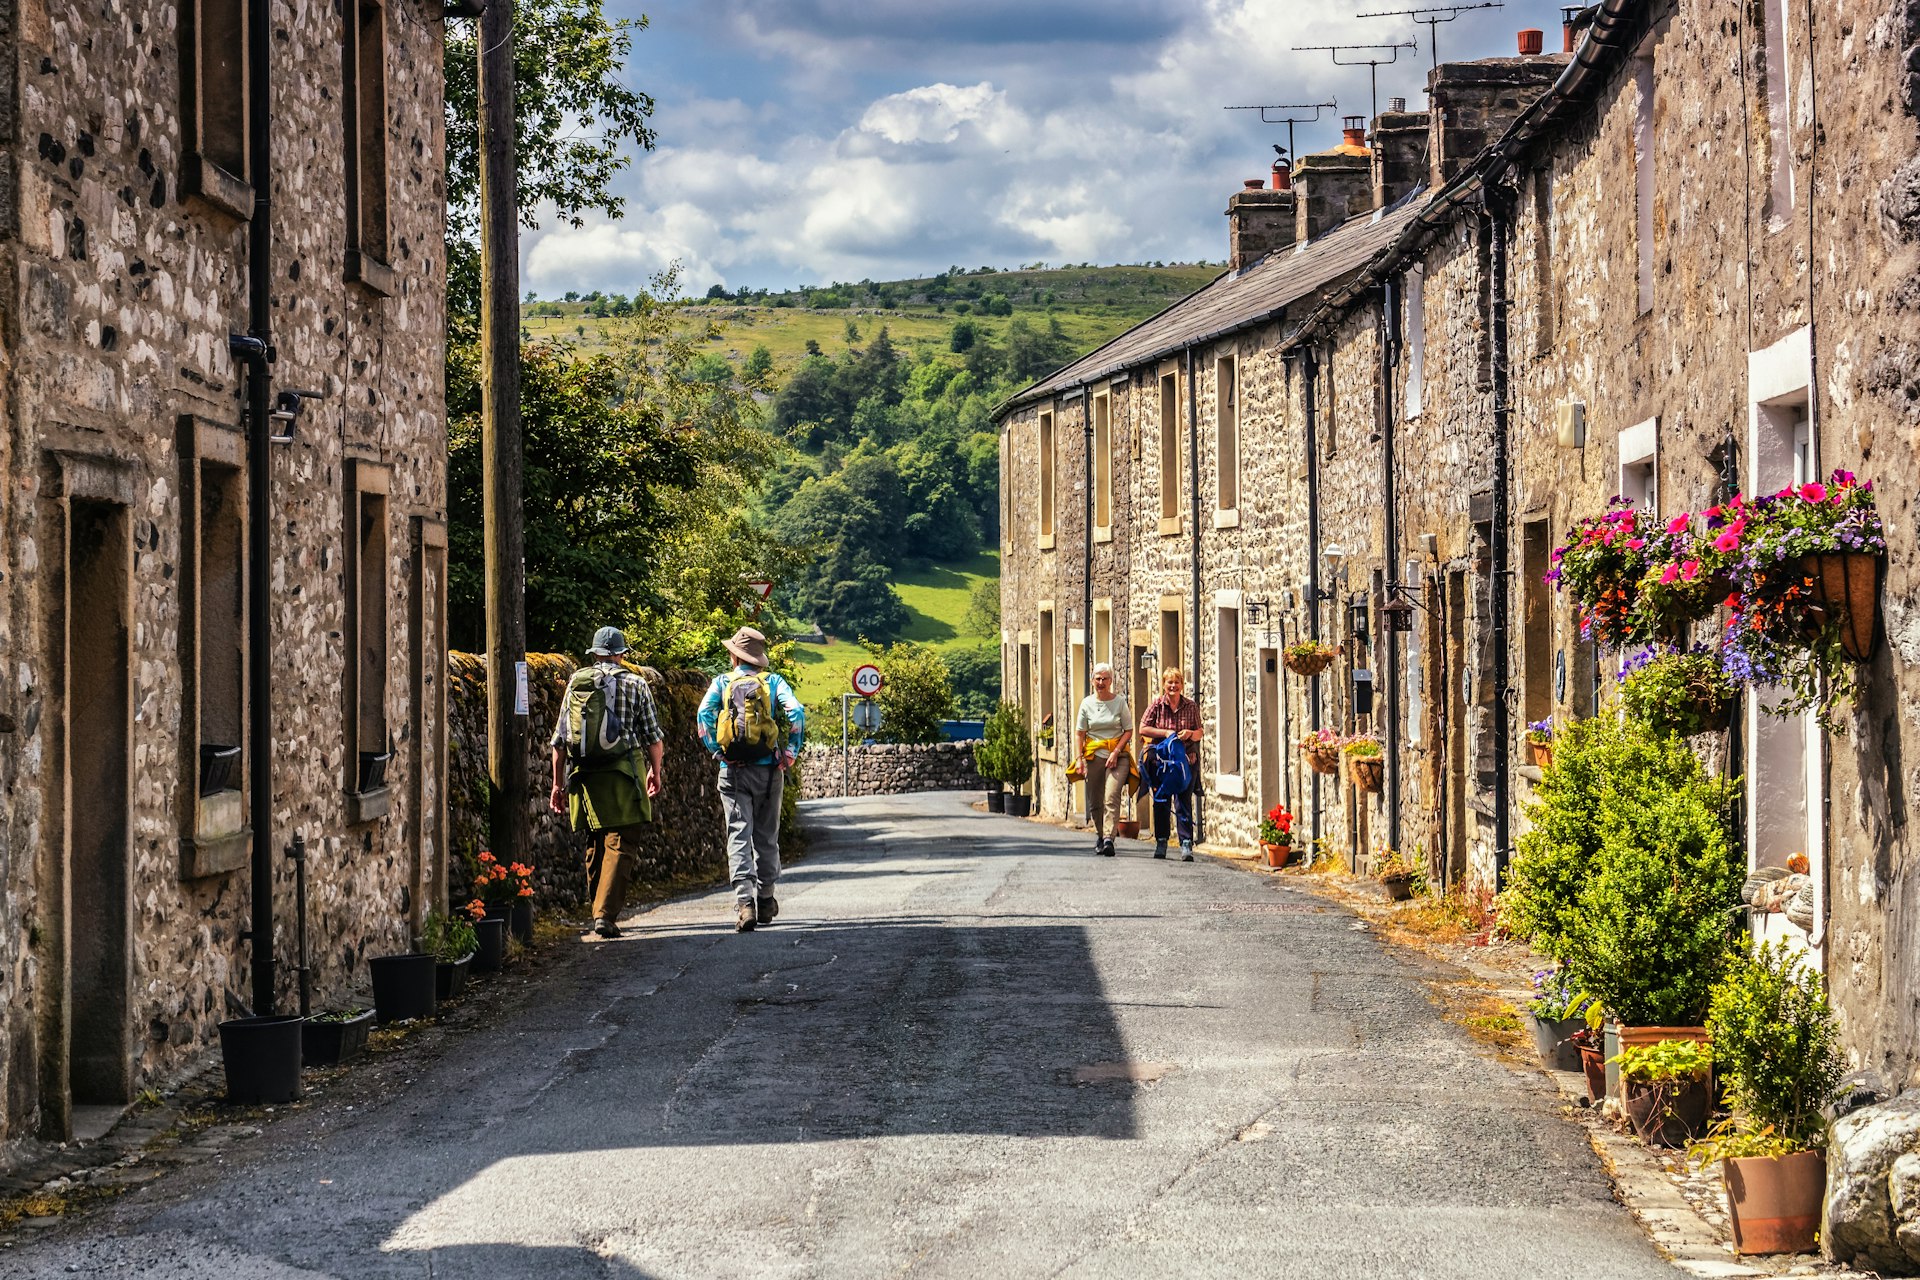 A sunny day street scene in Settle, North Yorkshire